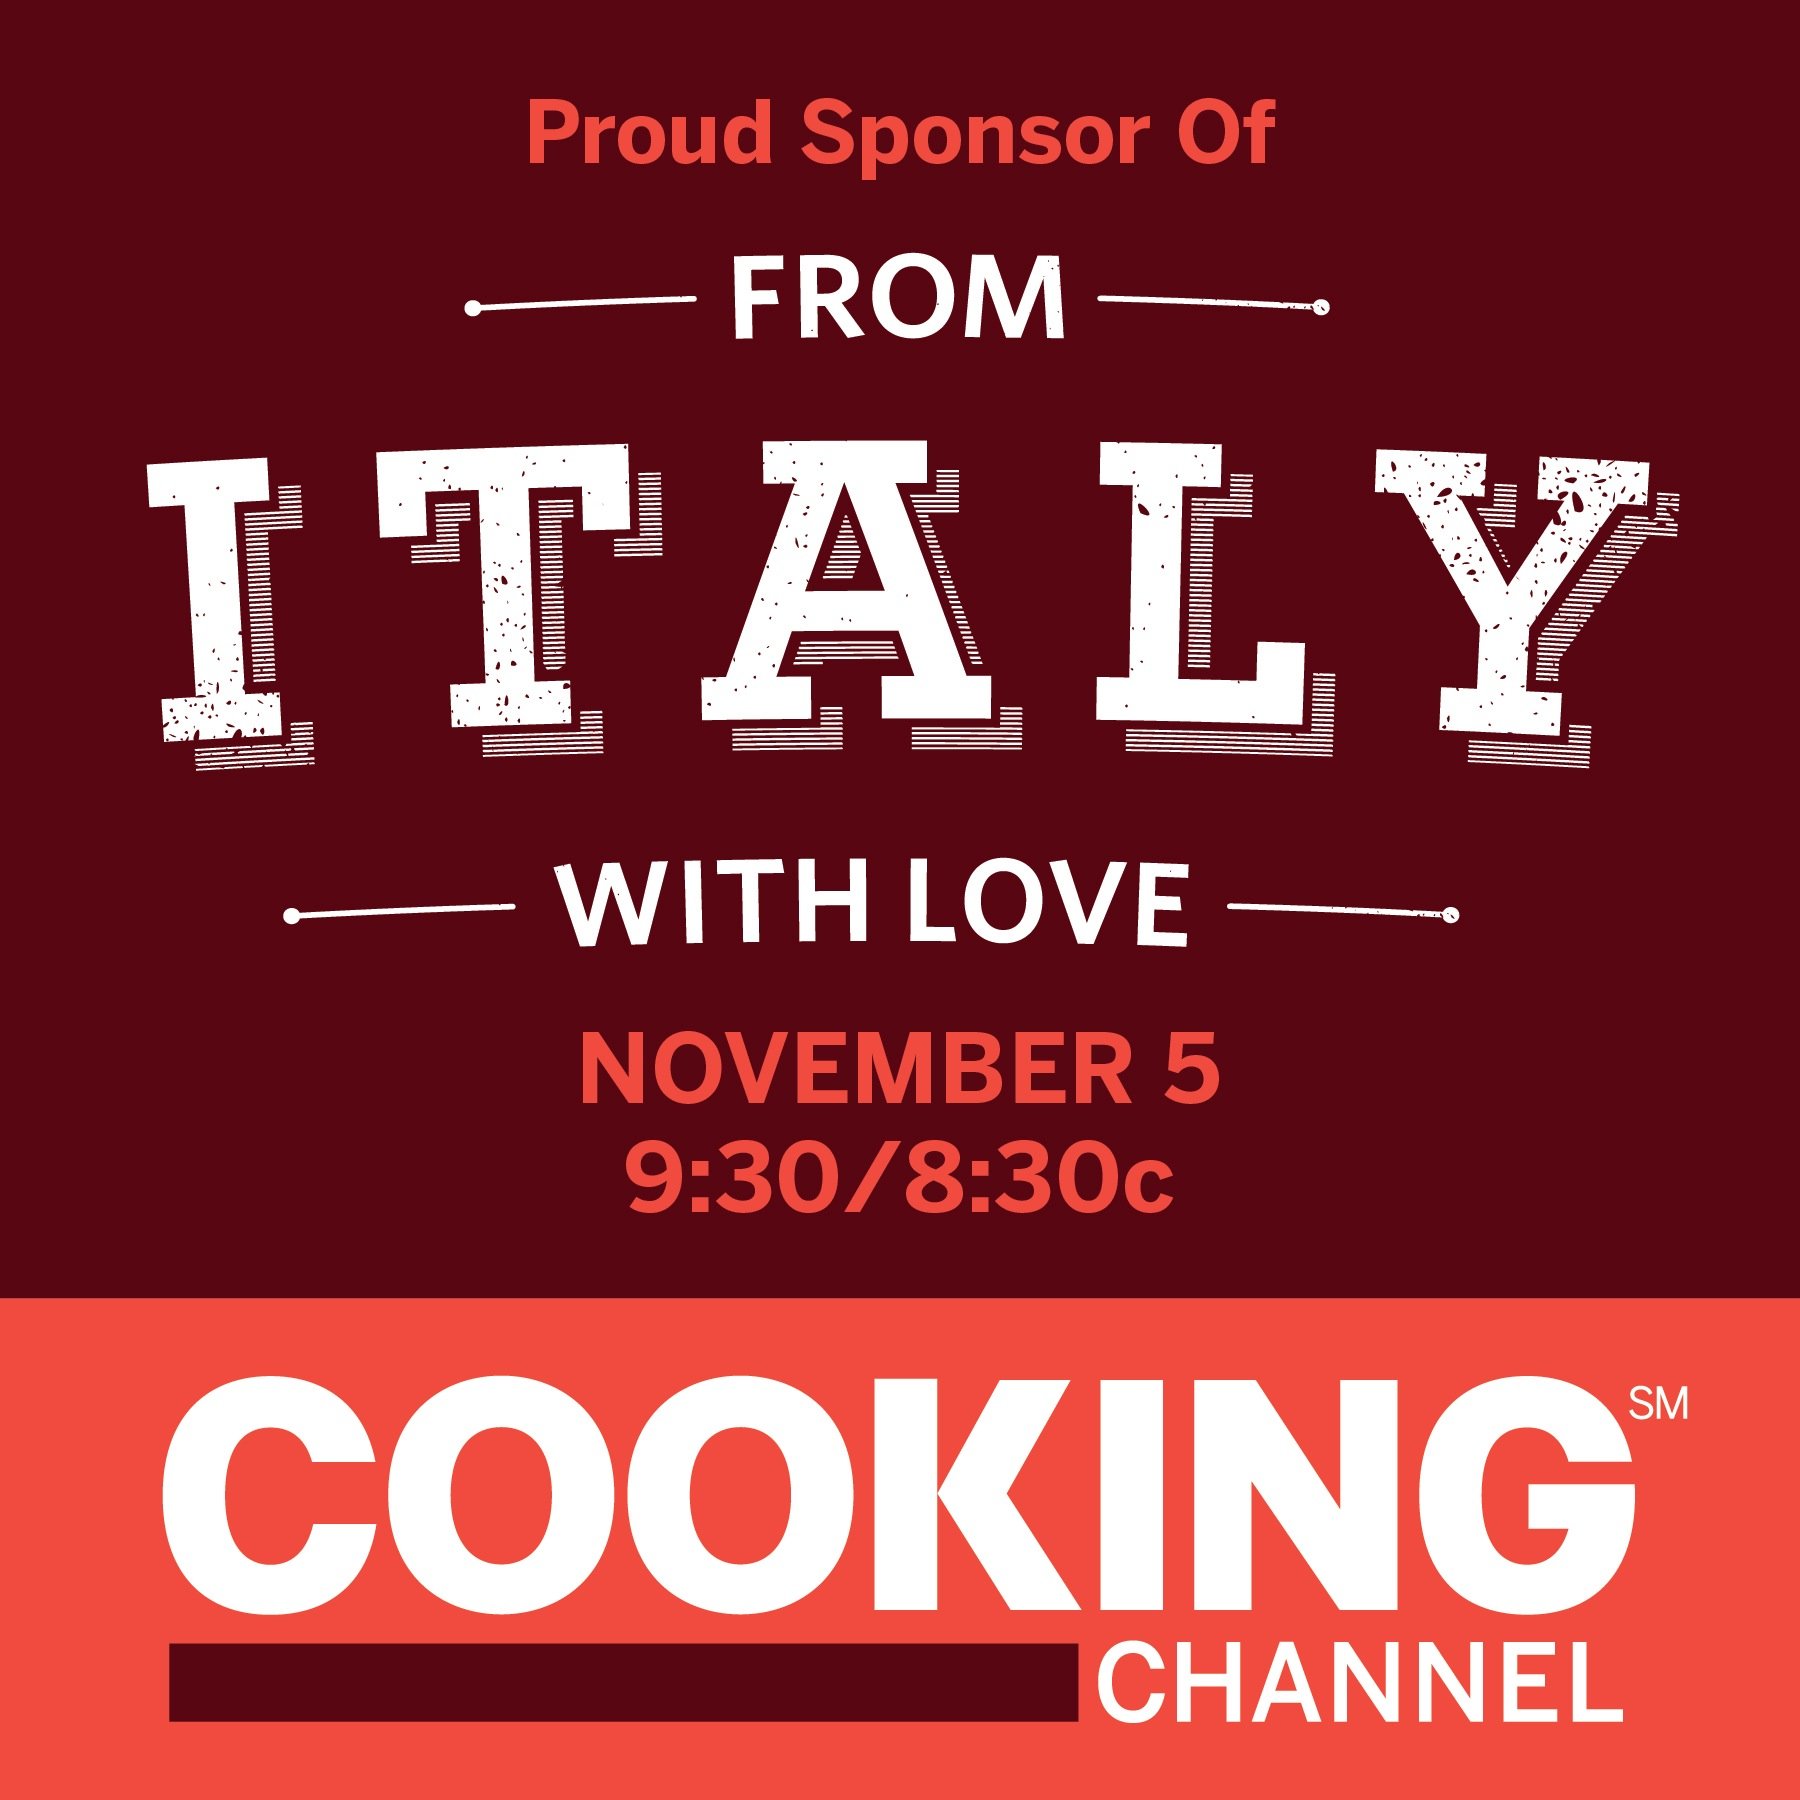 From Italy With Love Tv Show launching on Cooking Channel on Wednesday, November 5th at 9:30PM/8:30c! Additional episodes on Zonin Prosecco's YouTube!